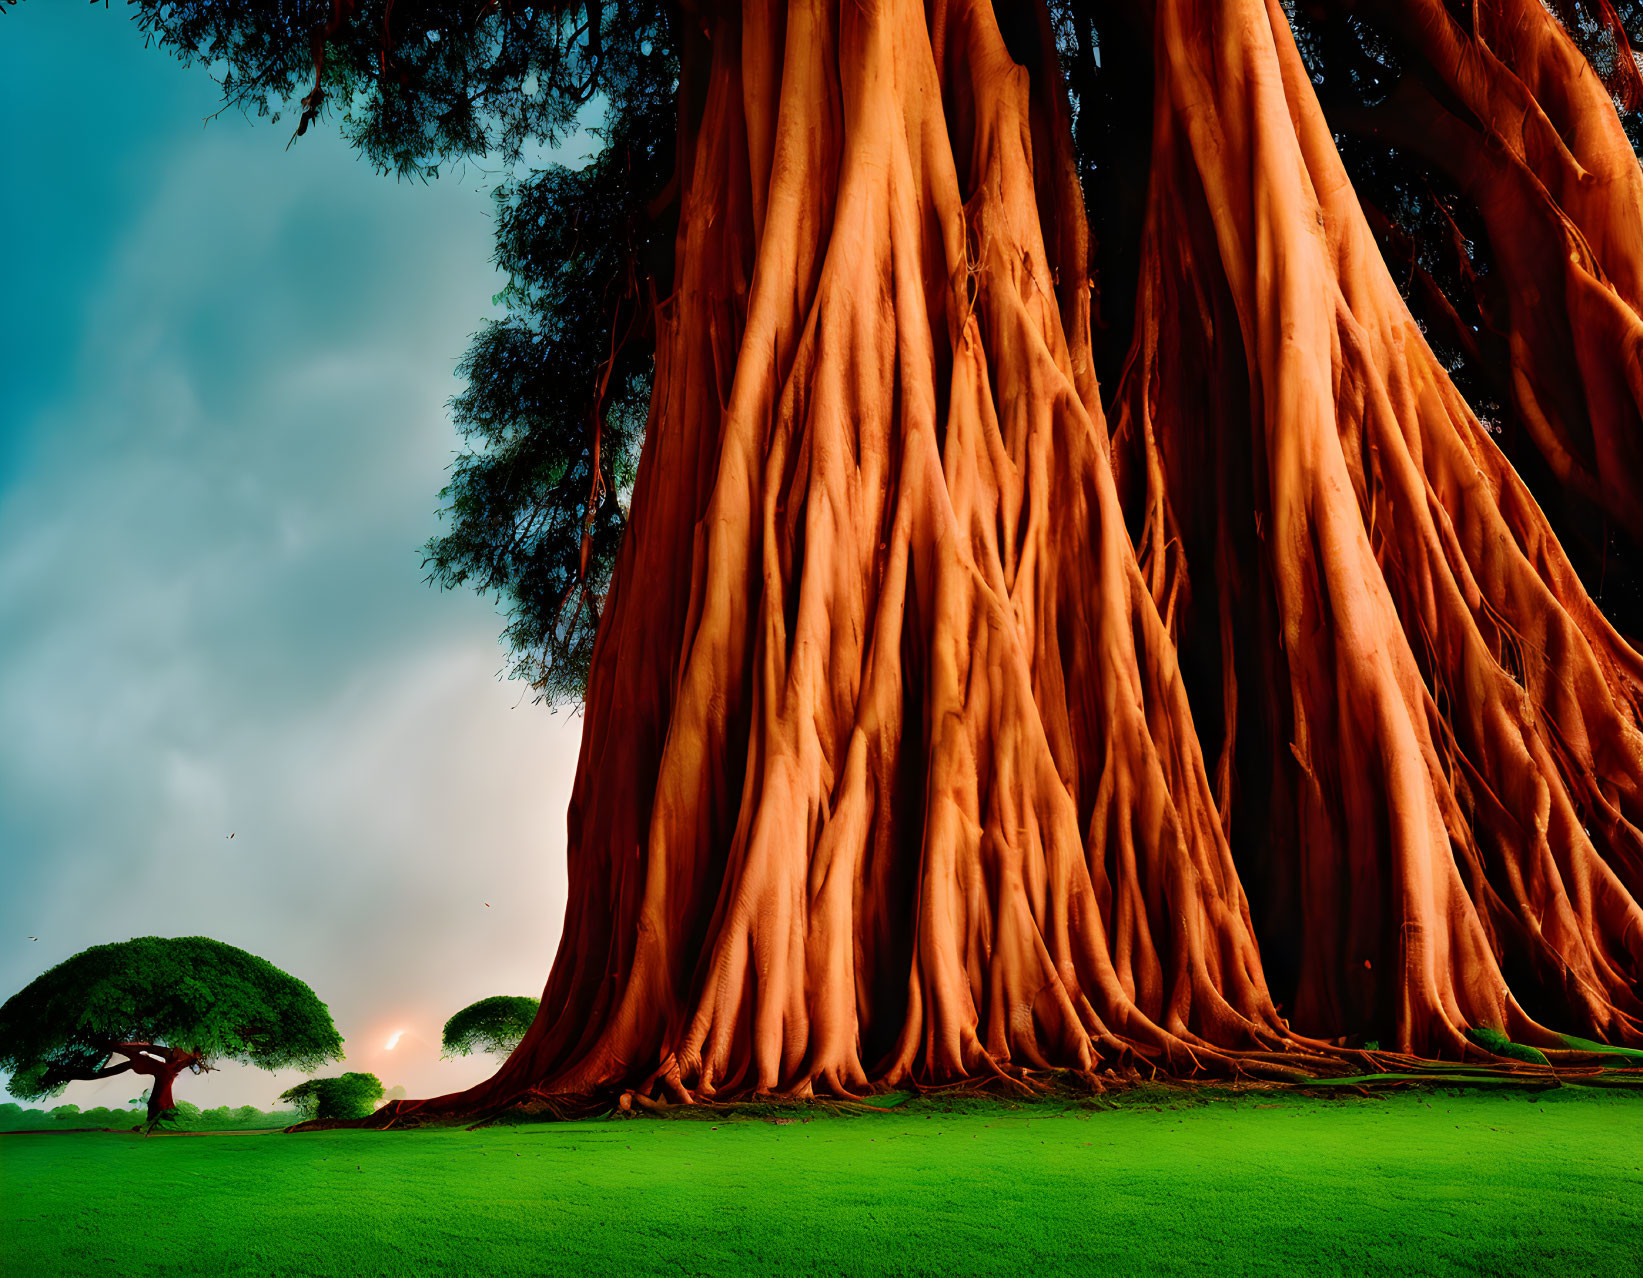 Majestic red-barked trees in lush green landscape under dramatic sky